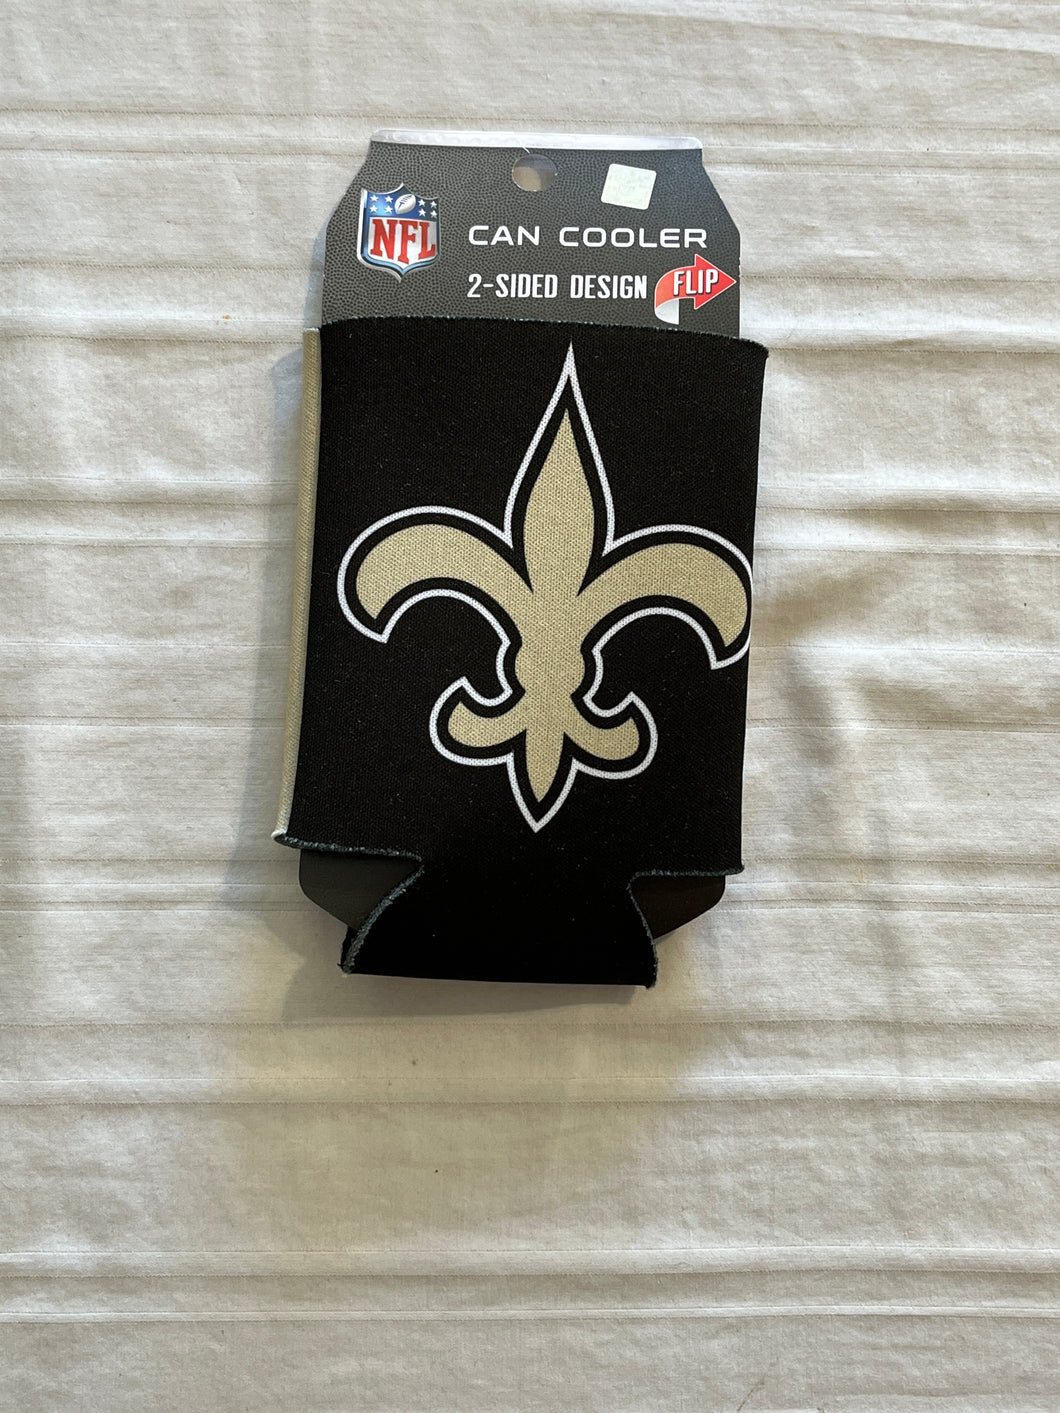 New Orleans Saints NFL 2-Sided Koozies Coozies Can Cooler Wincraft - Casey's Sports Store